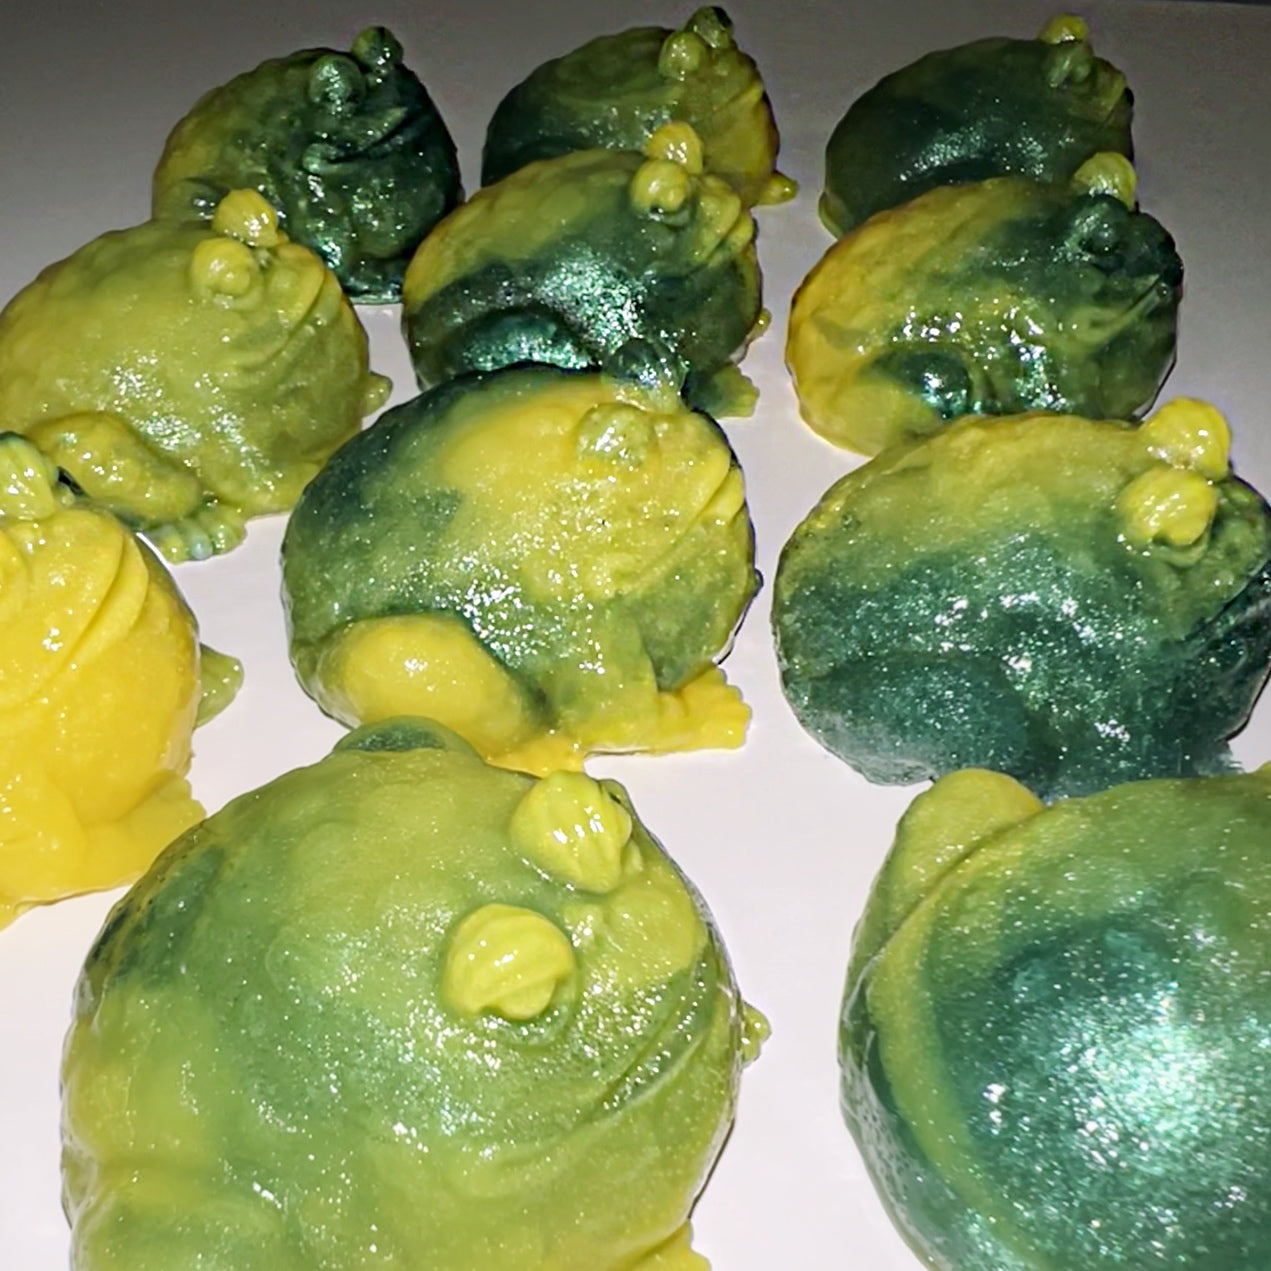 Two toads - 2 piece seaweed jelly soap